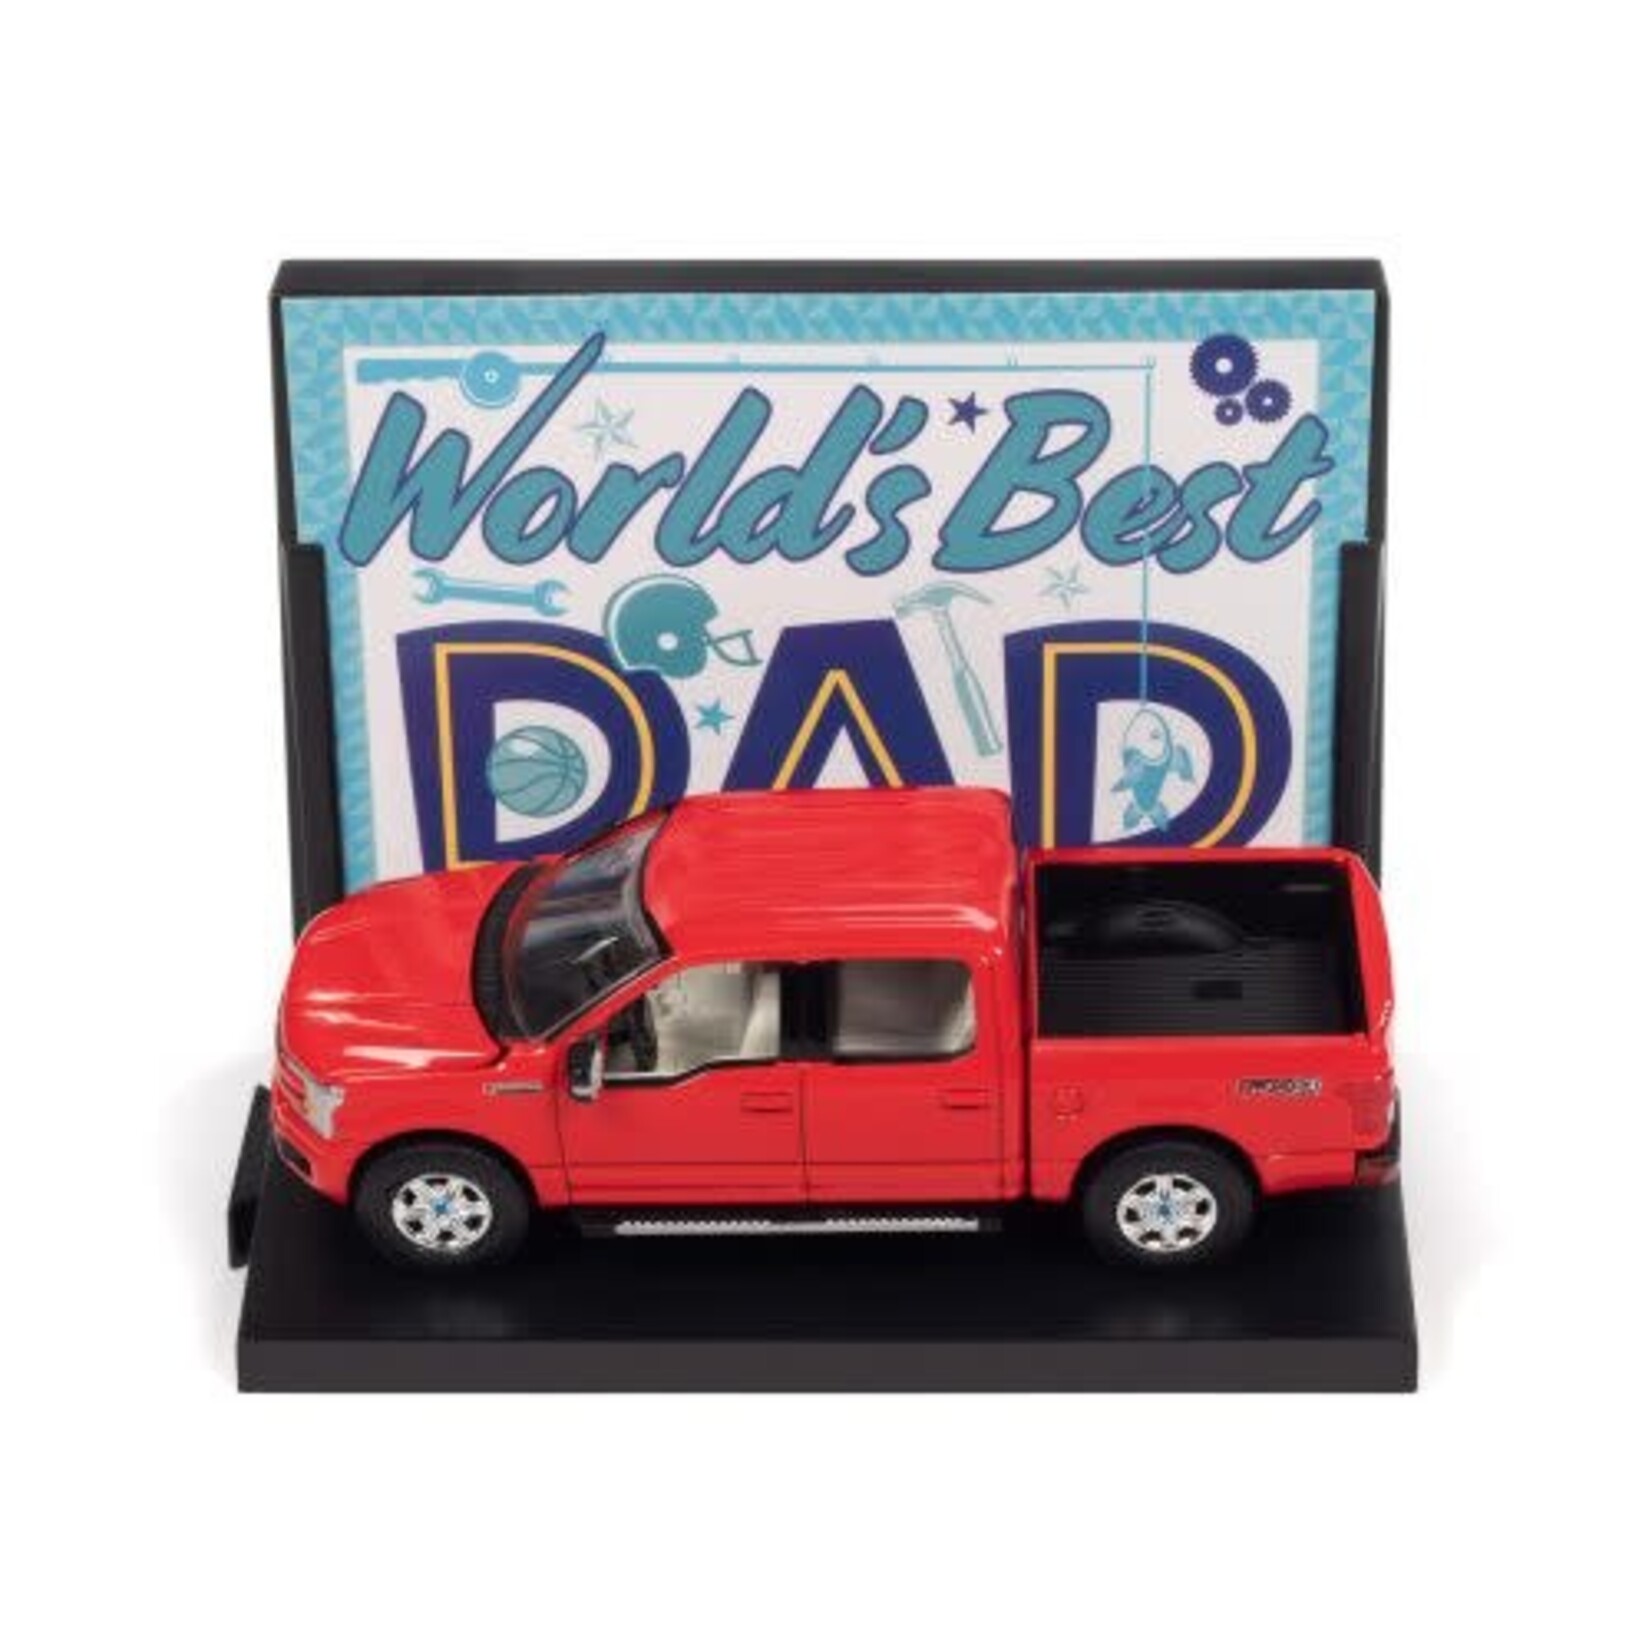 Auto World AWAC017 Auto World Worlds Best Dad 2018 Ford F150 Lariat Pickup Truck w/Base & Trading Card (Red) 1:64 Scale Diecast